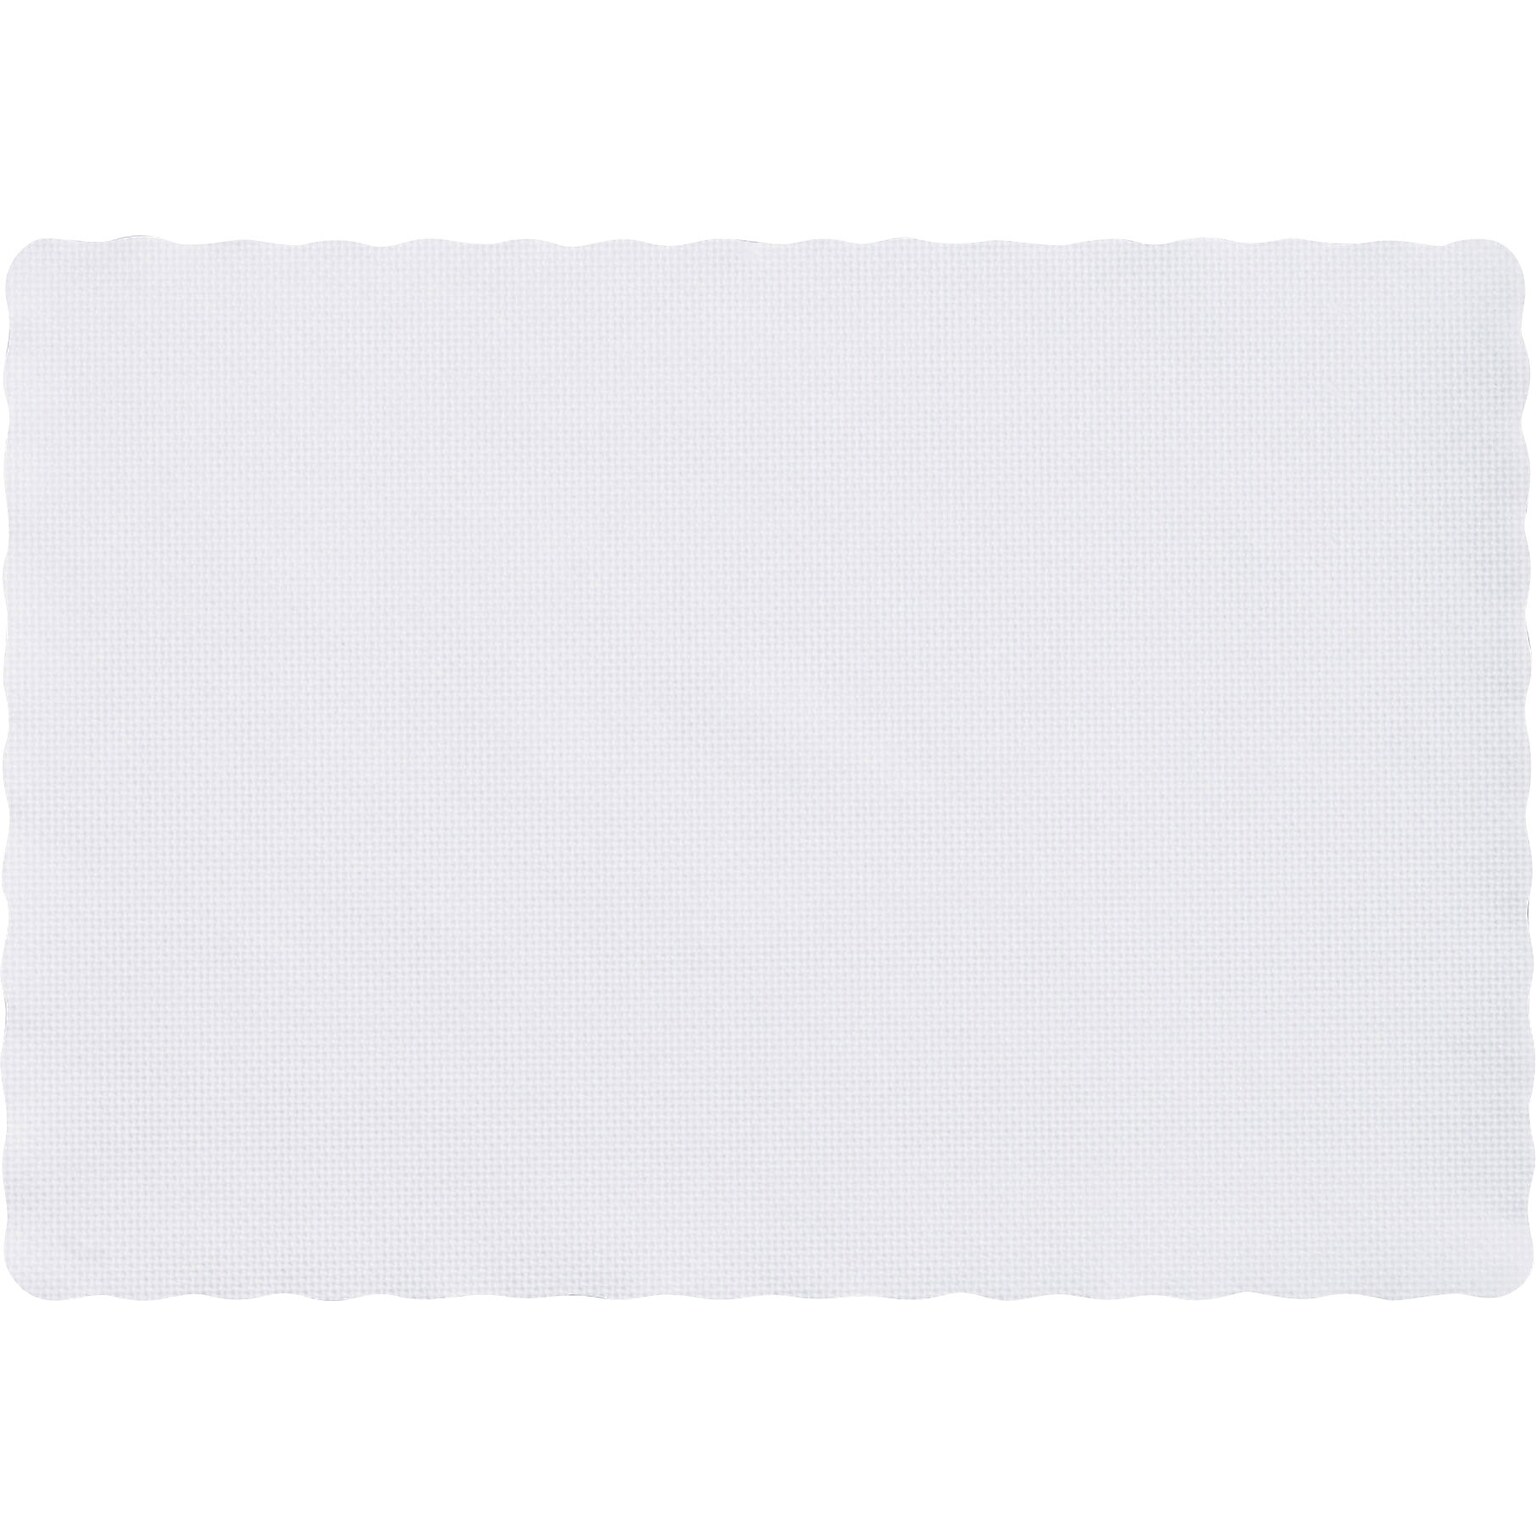 Hoffmaster® Placemats; Scalloped Edge, White, 9-1/2W x 13-1/2L, 1000/Pack